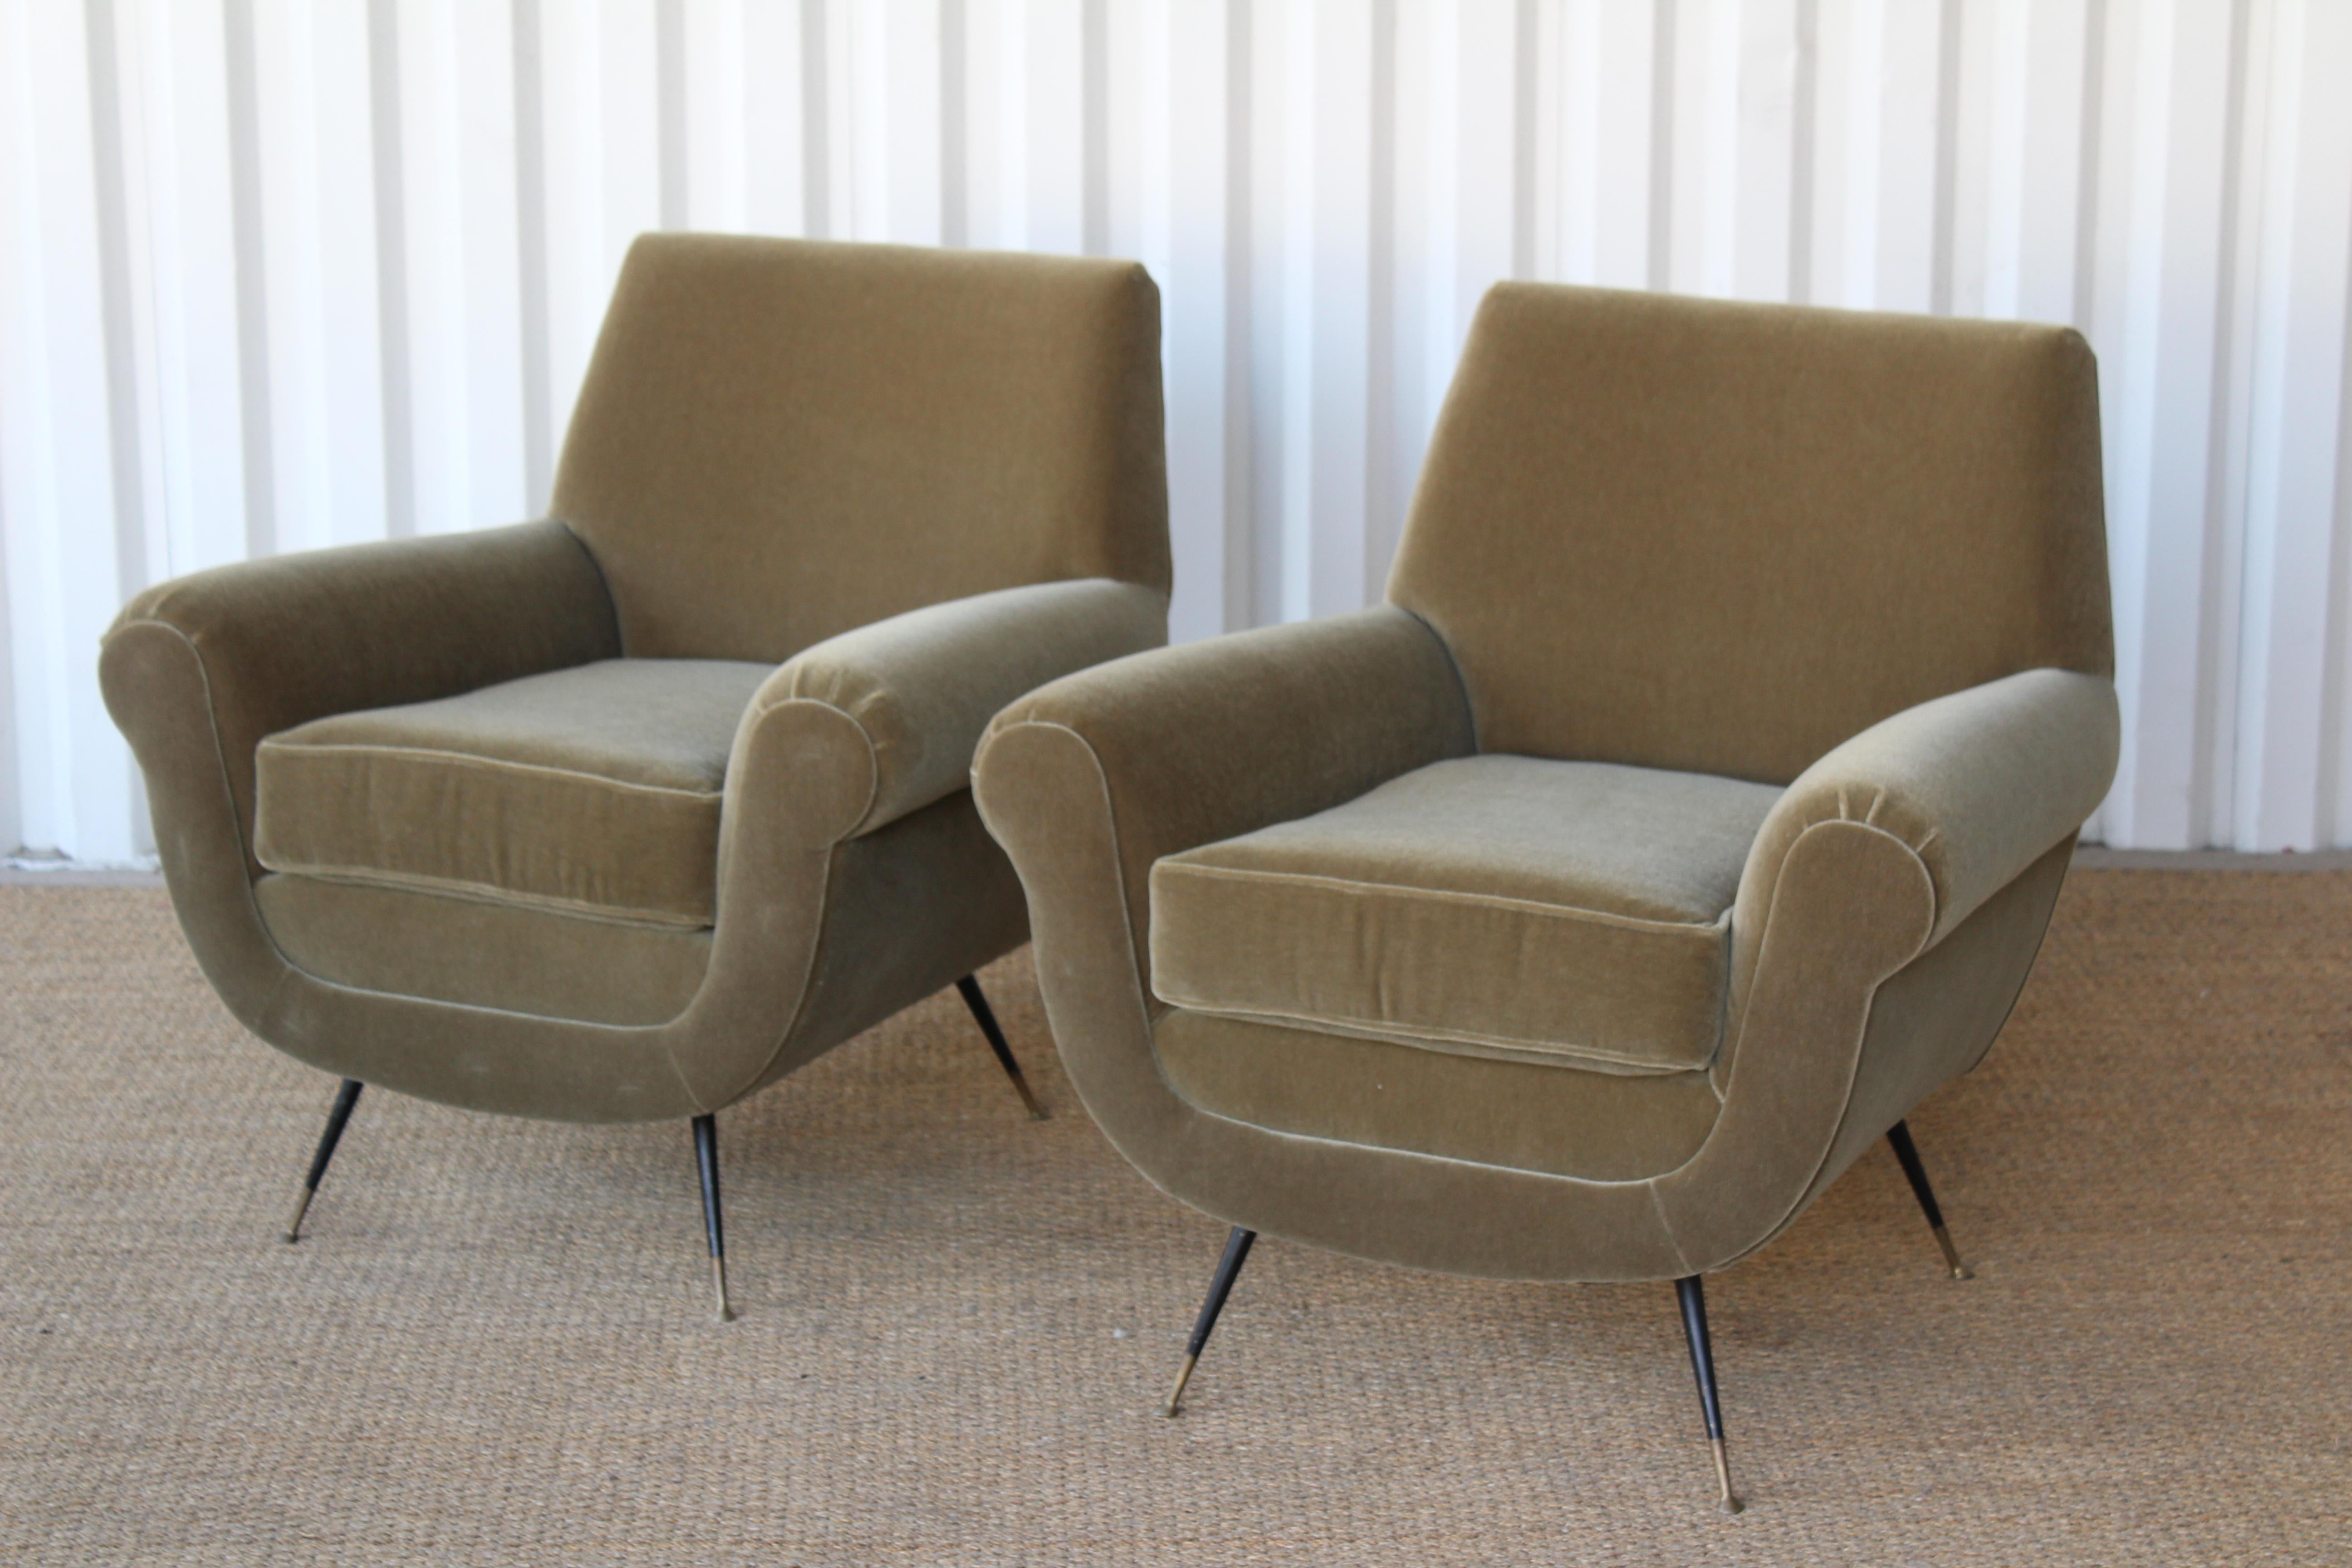 Brass Pair of Lounge Chairs by Gigi Radice for Minotti, Italy, 1950s